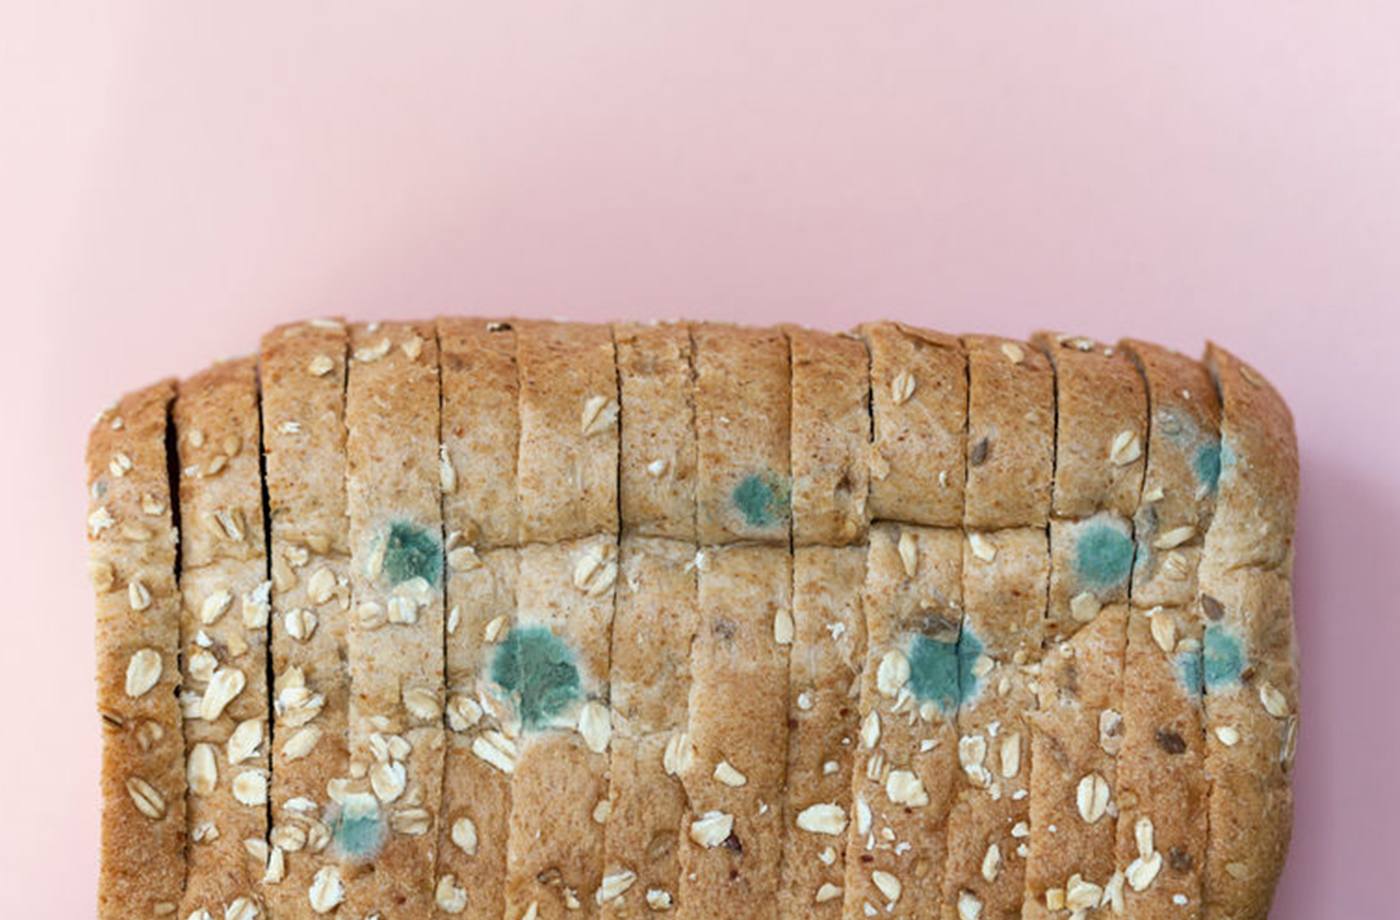 Here’s What’s *Actually* Going to Happen to You if You Accidentally Eat a Bite of Moldy Bread